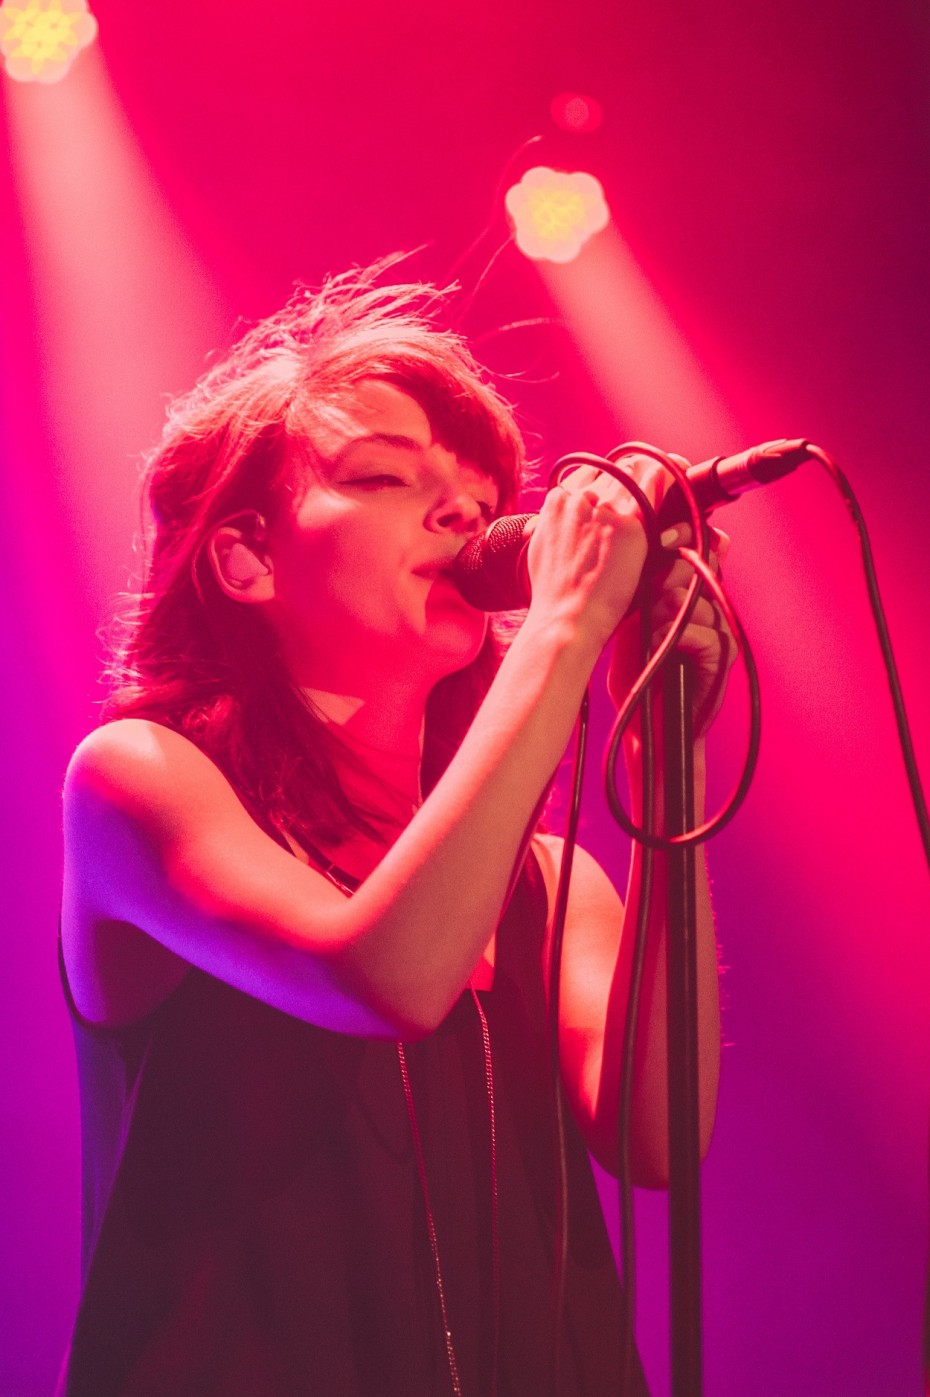 Although she is the band's vocalist, Lauren Mayberry occasionally plays the synthesizer. Photo by All Is Amazing.